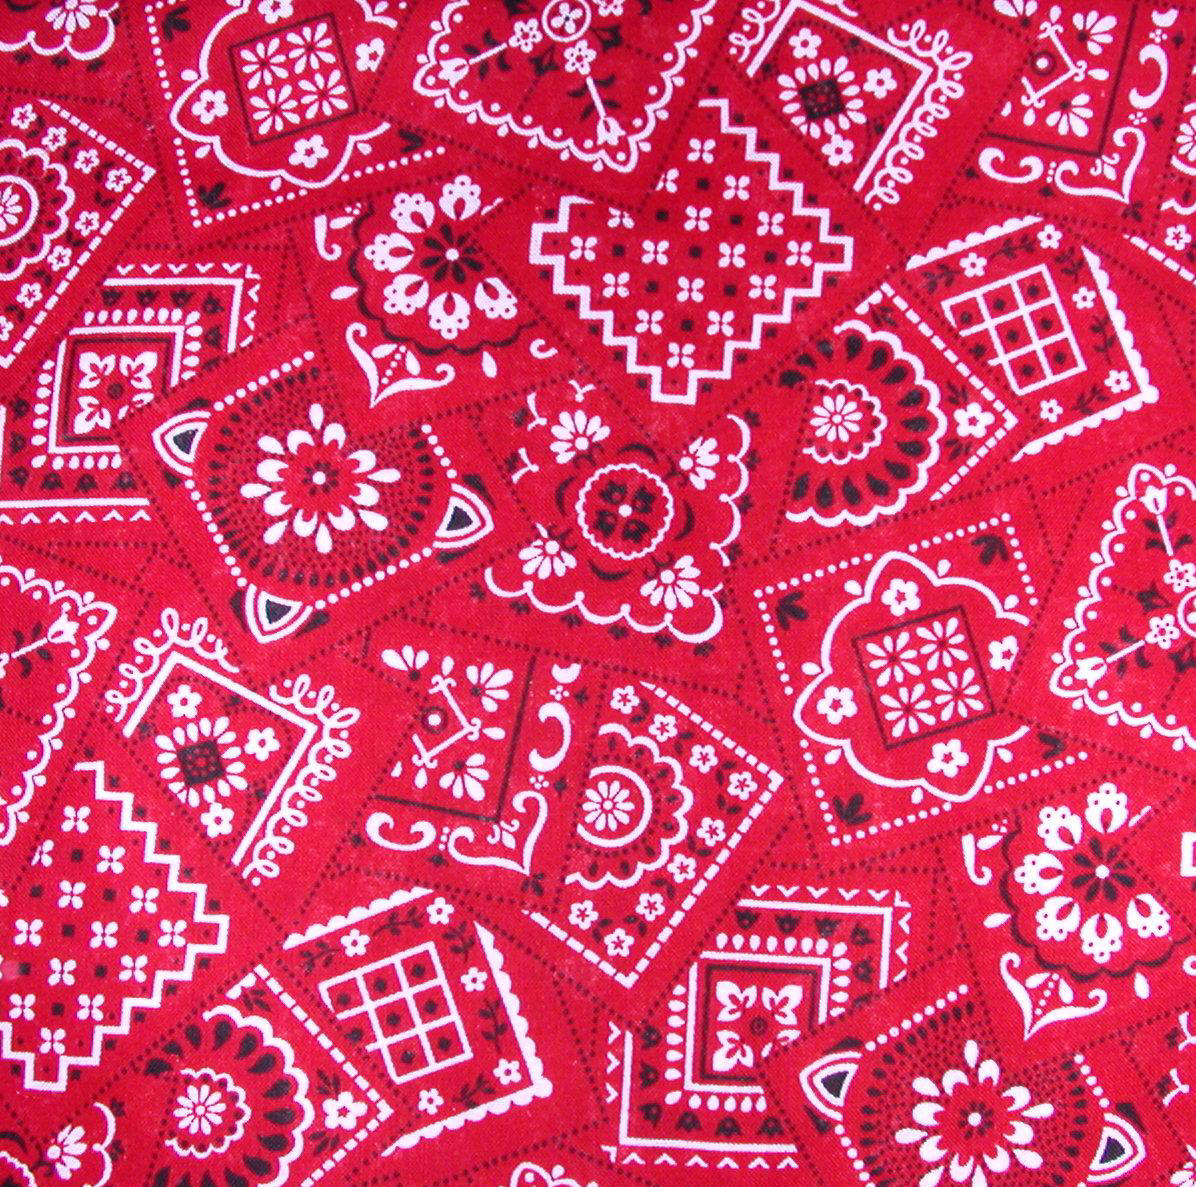 Bandana3 Pictures To Pin